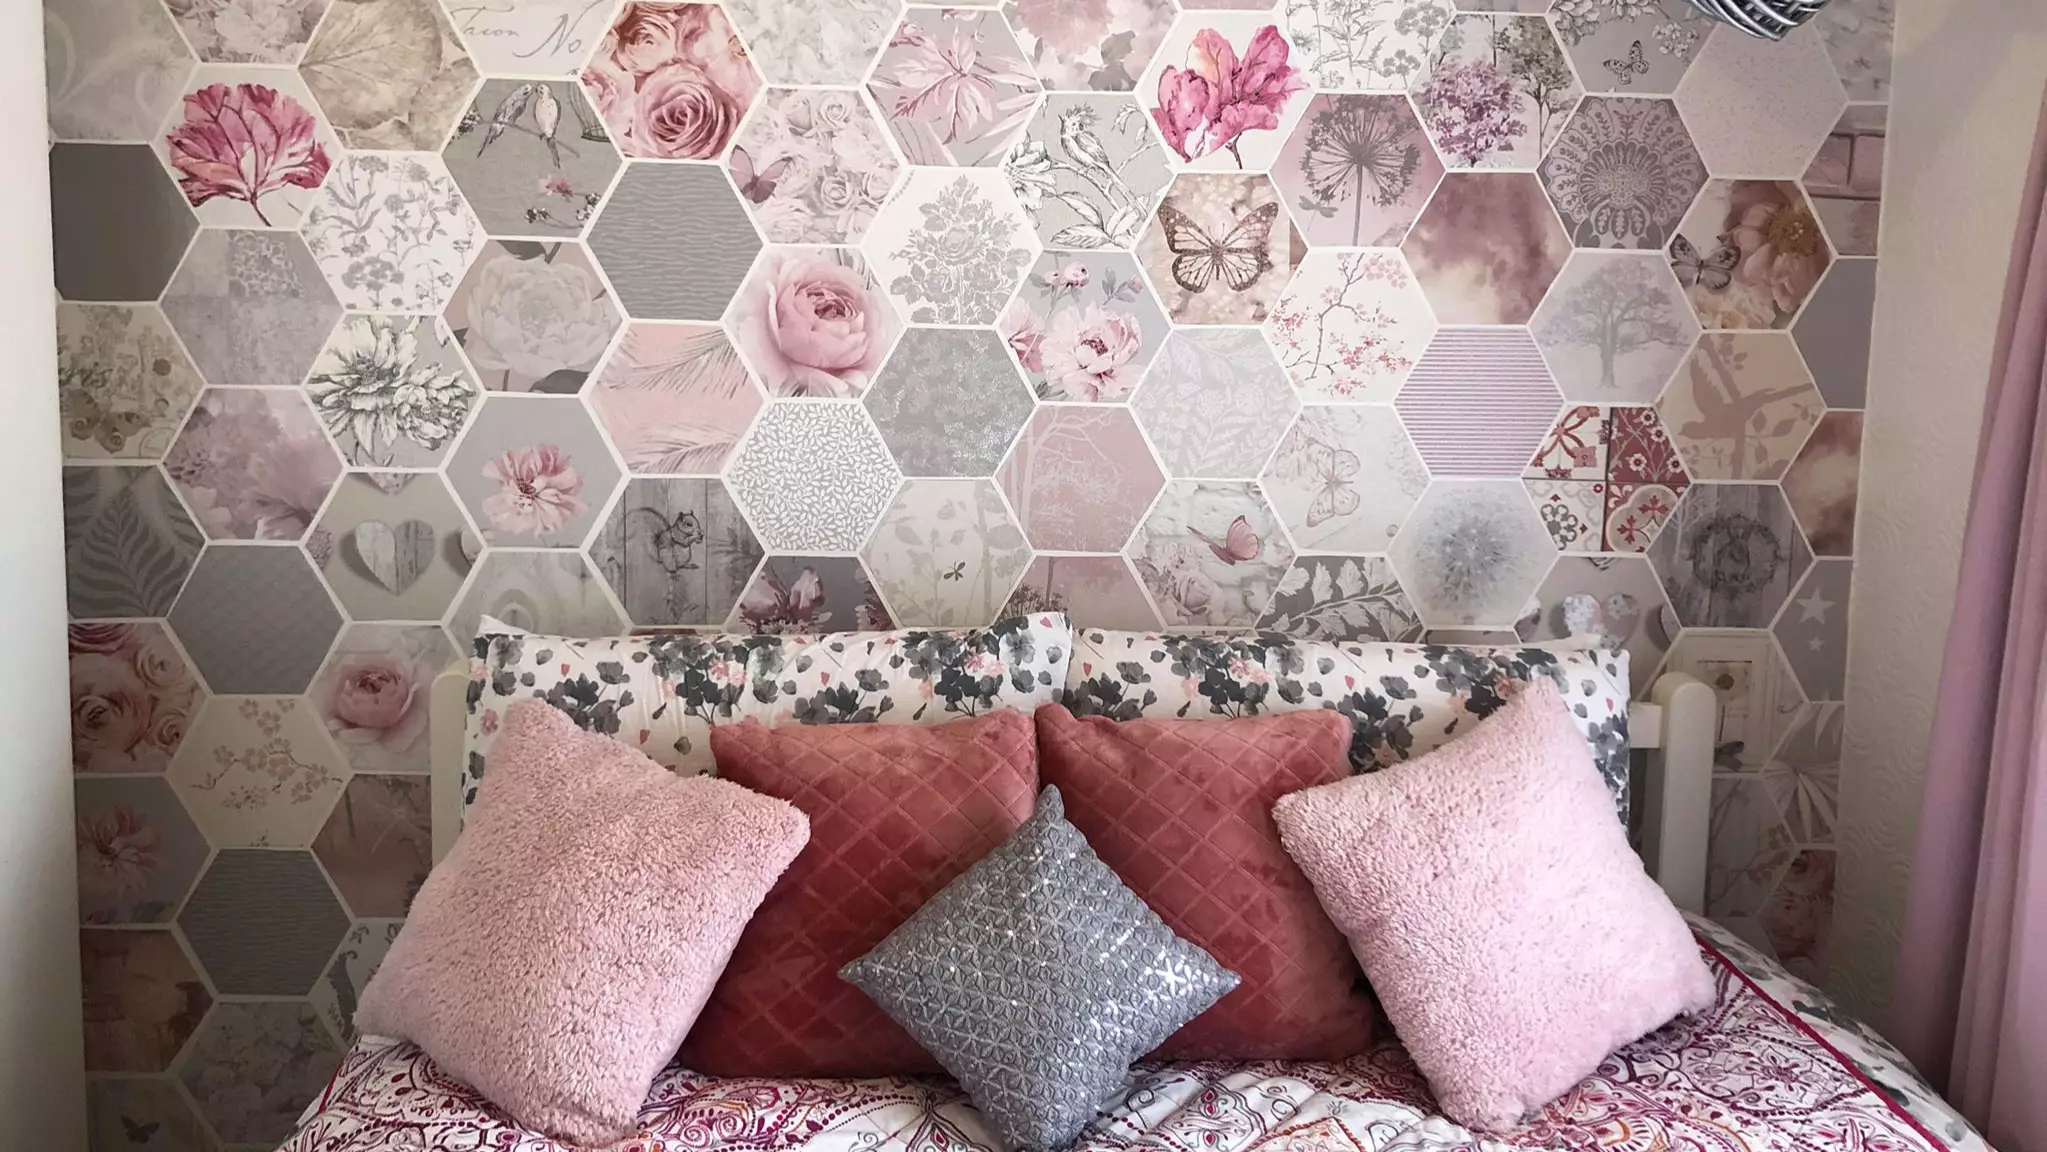 This Woman Created An Amazing Feature Wall Using Just Wallpaper Samples